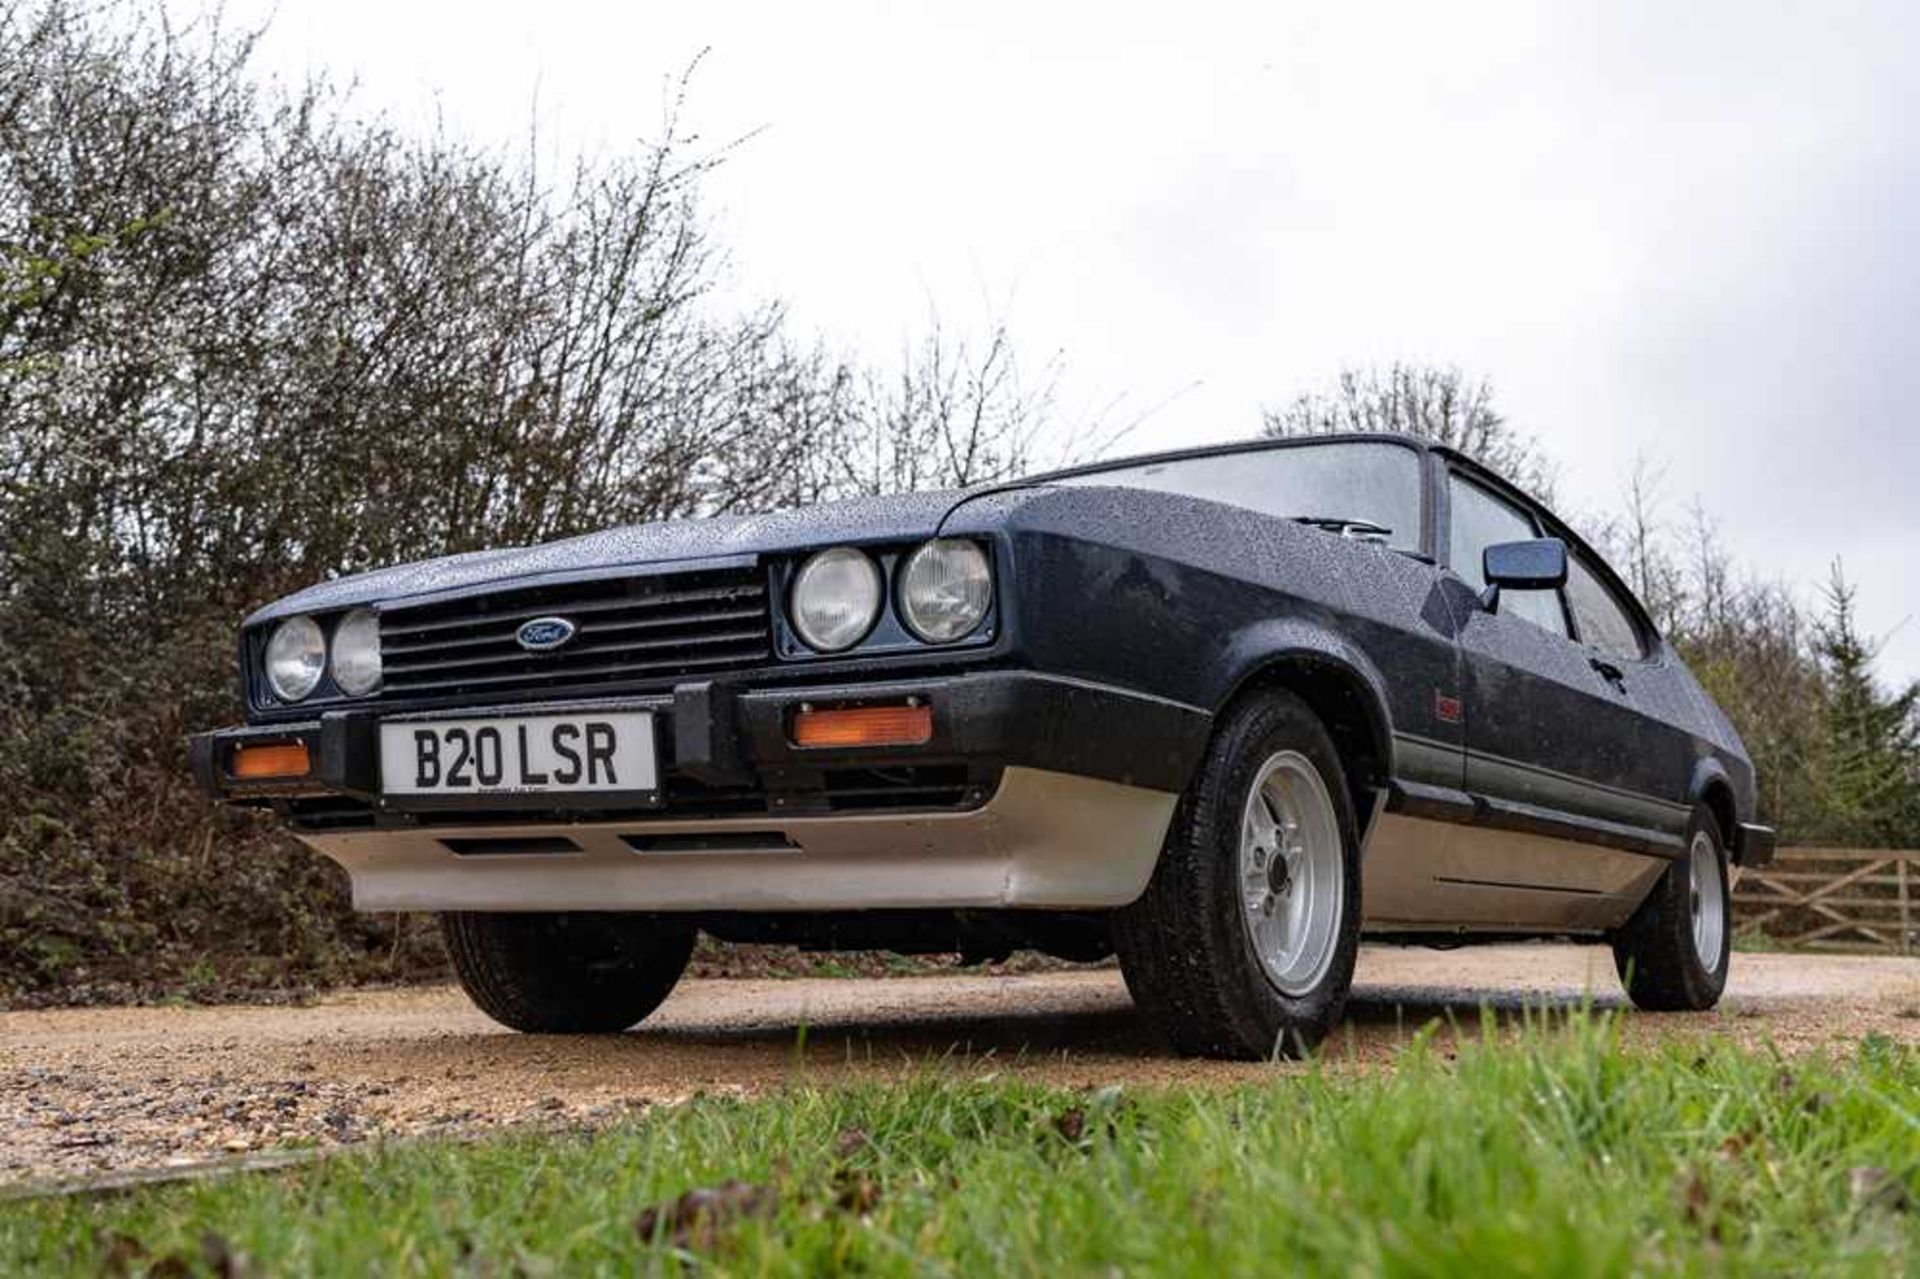 1985 Ford Capri Laser 2.0 Litre Warranted 55,300 miles from new - Image 17 of 67